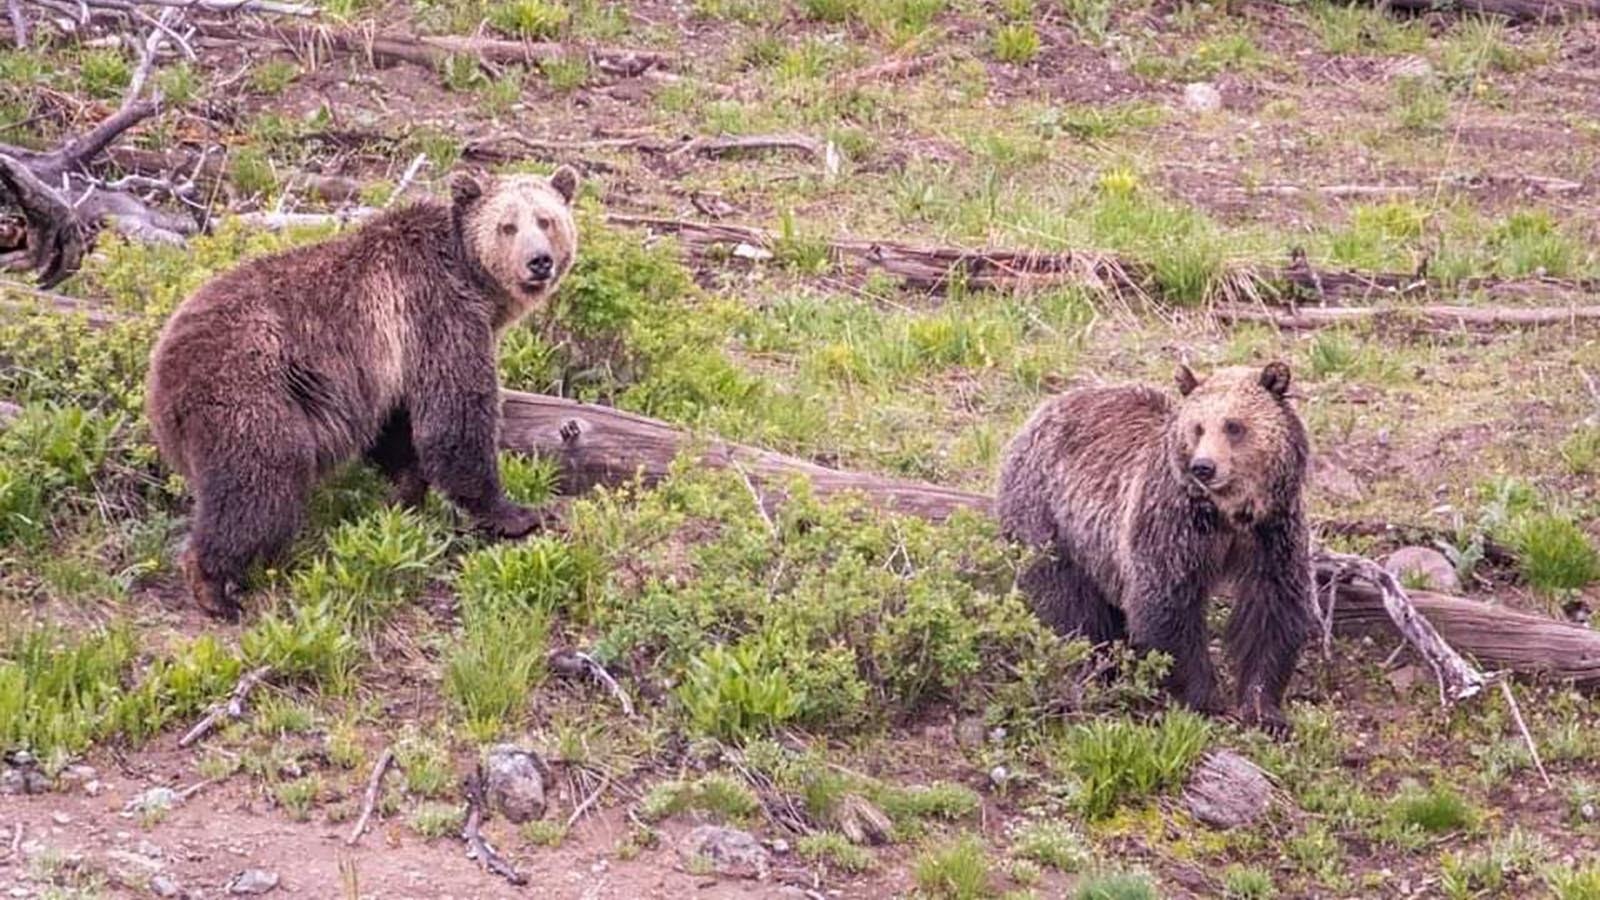 Jam, right, is a 3-year-old grizzly in Yellowstone that is finally separating from her mother, Raspberry, left.